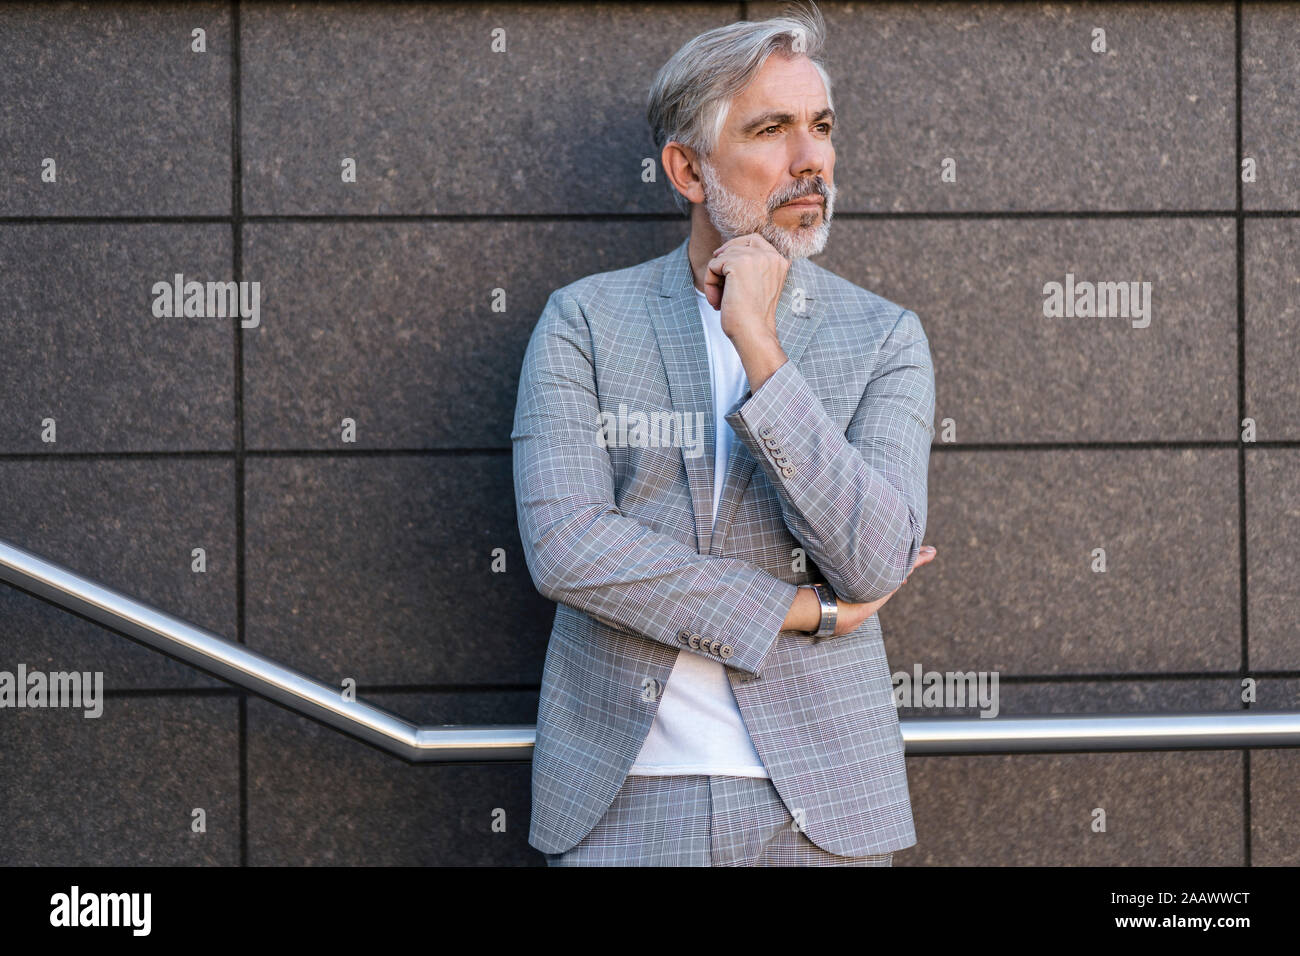 Fashionable mature businessman standing outdoors Stock Photo